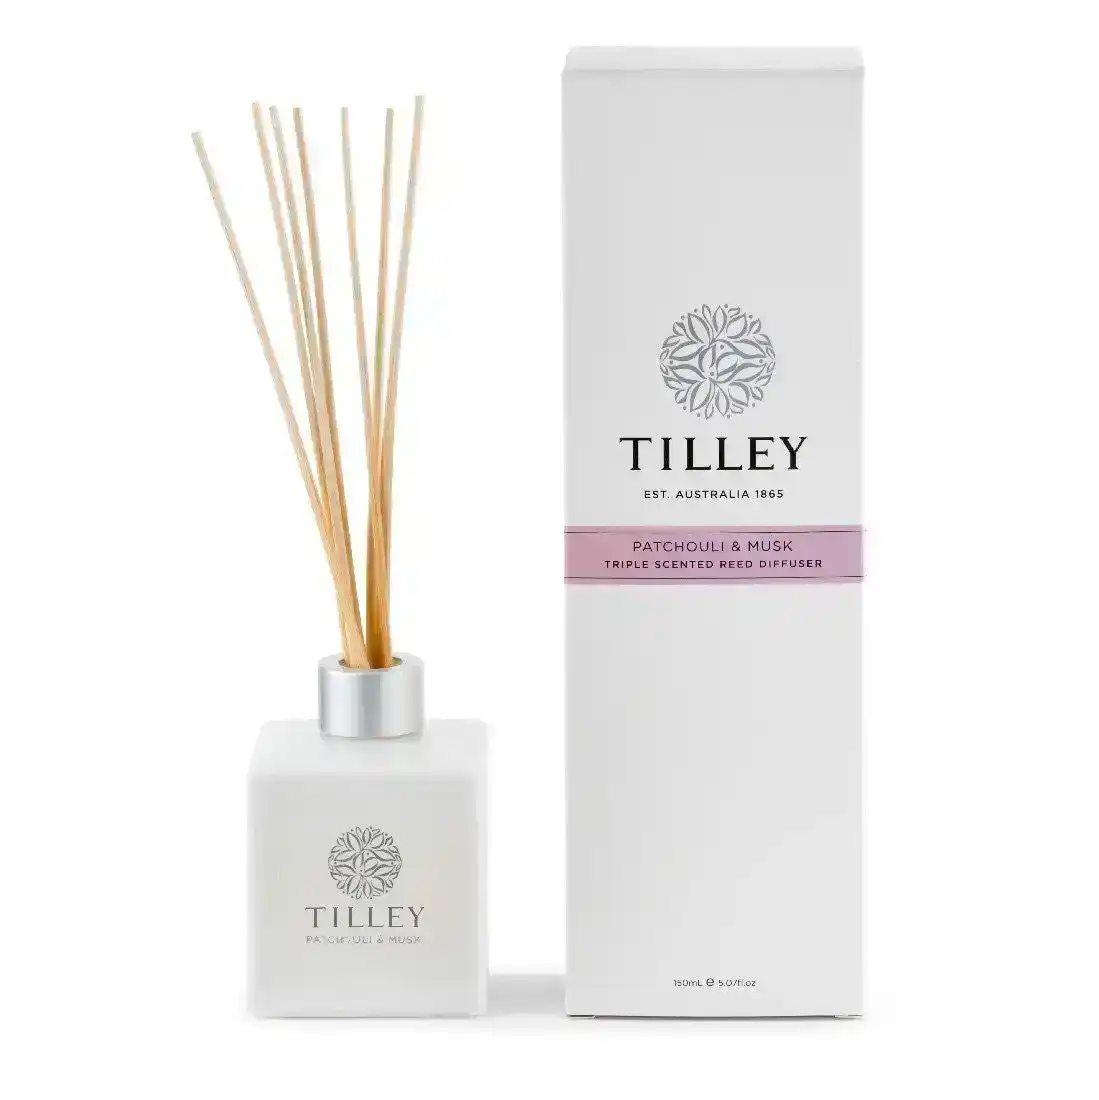 Tilley Classic White - Reed Diffuser 150ml - Patchouli & Musk